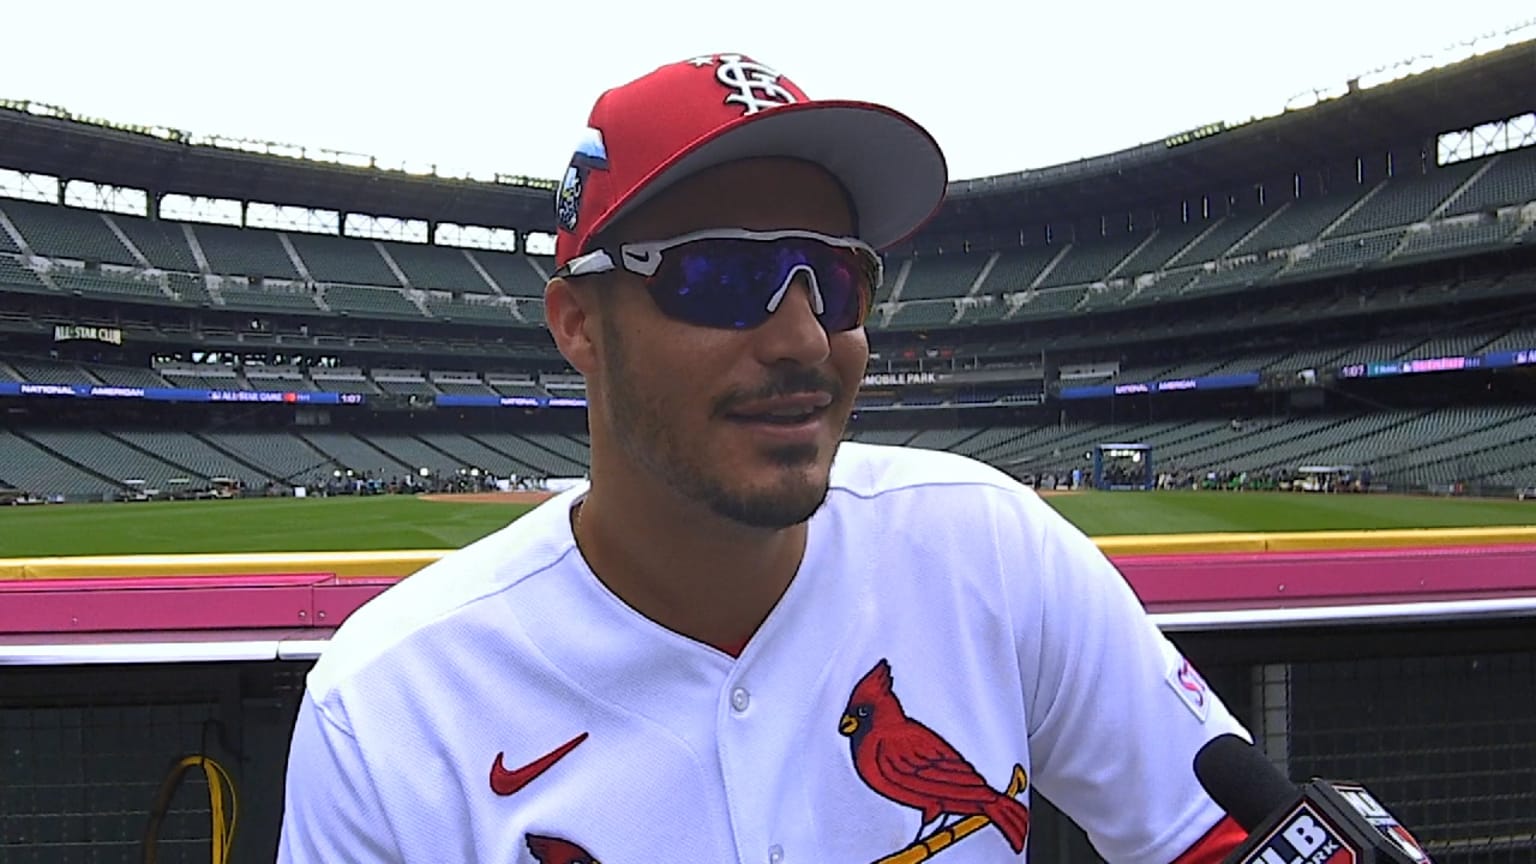 All-Star Baseball Sunglasses, What the MLB Pros are Wearing